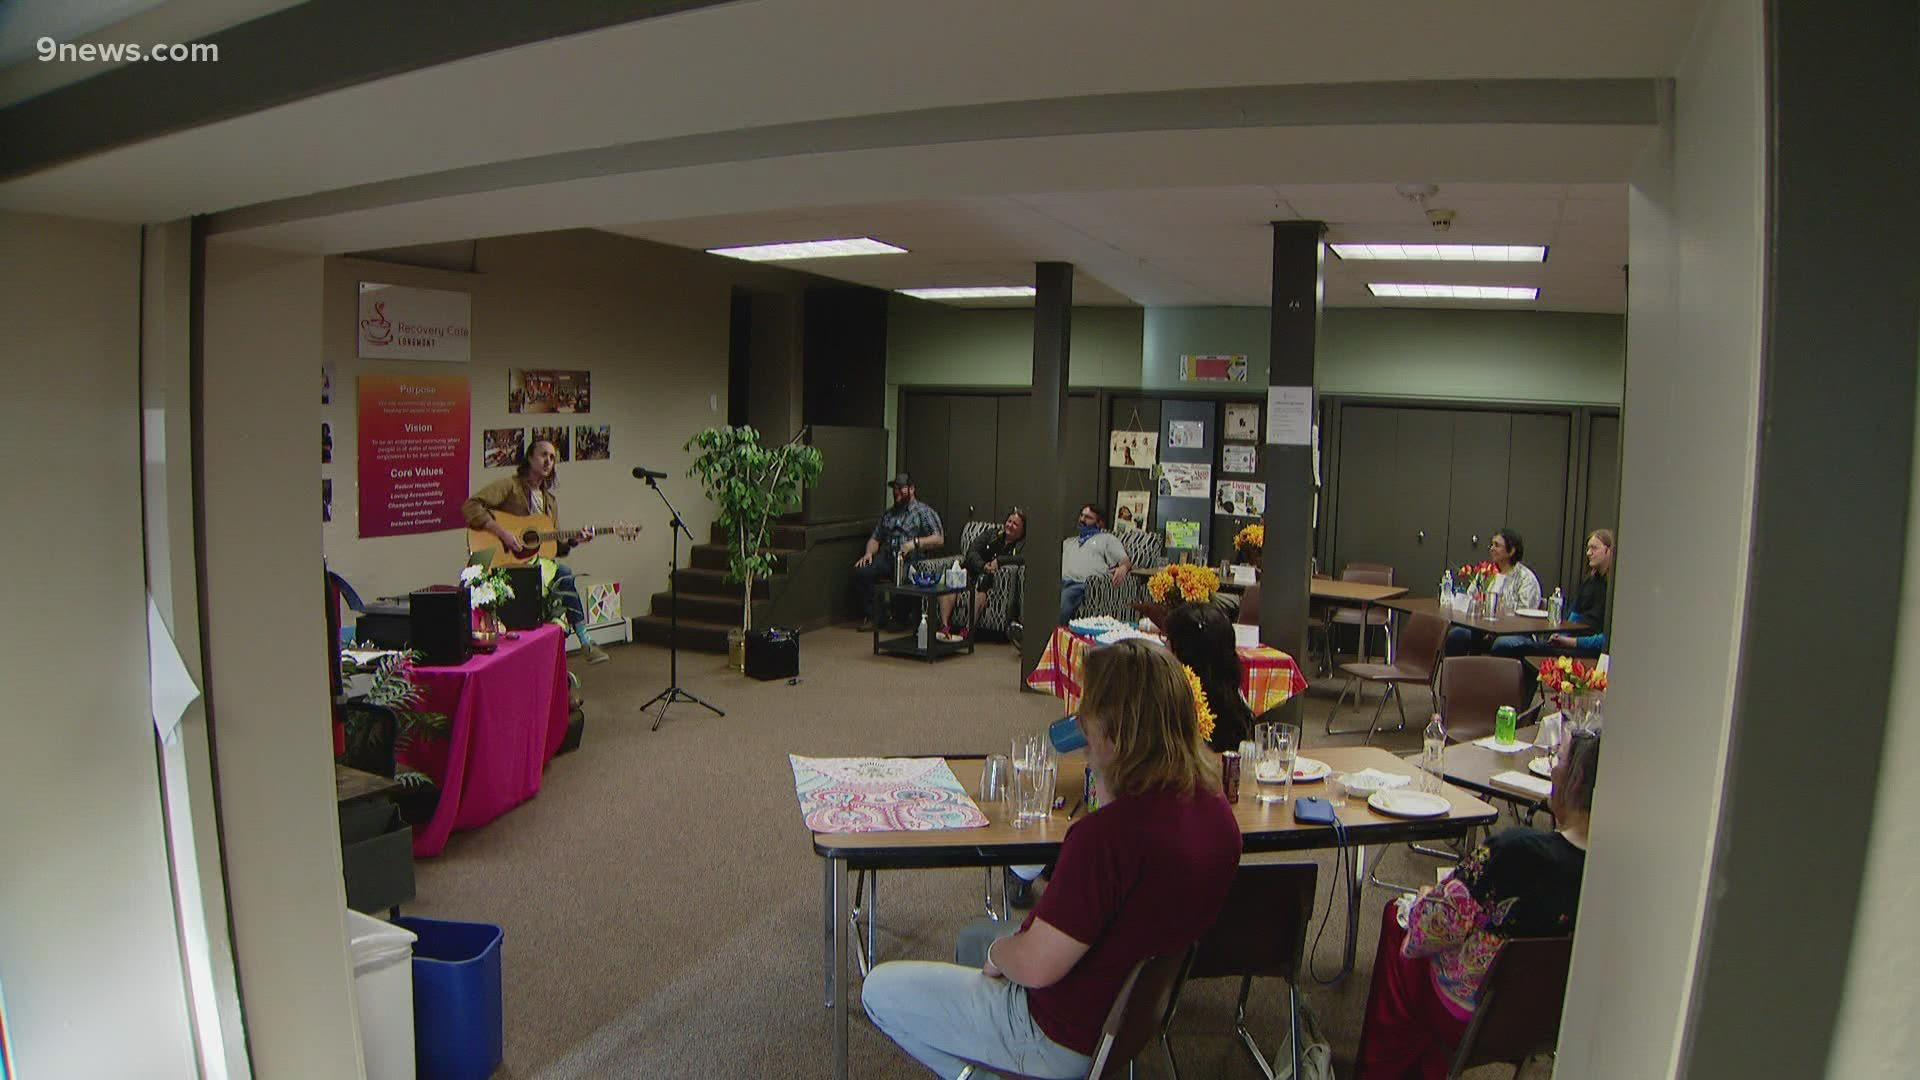 Located in Longmont, this safe space is a place where those in recovery can go.